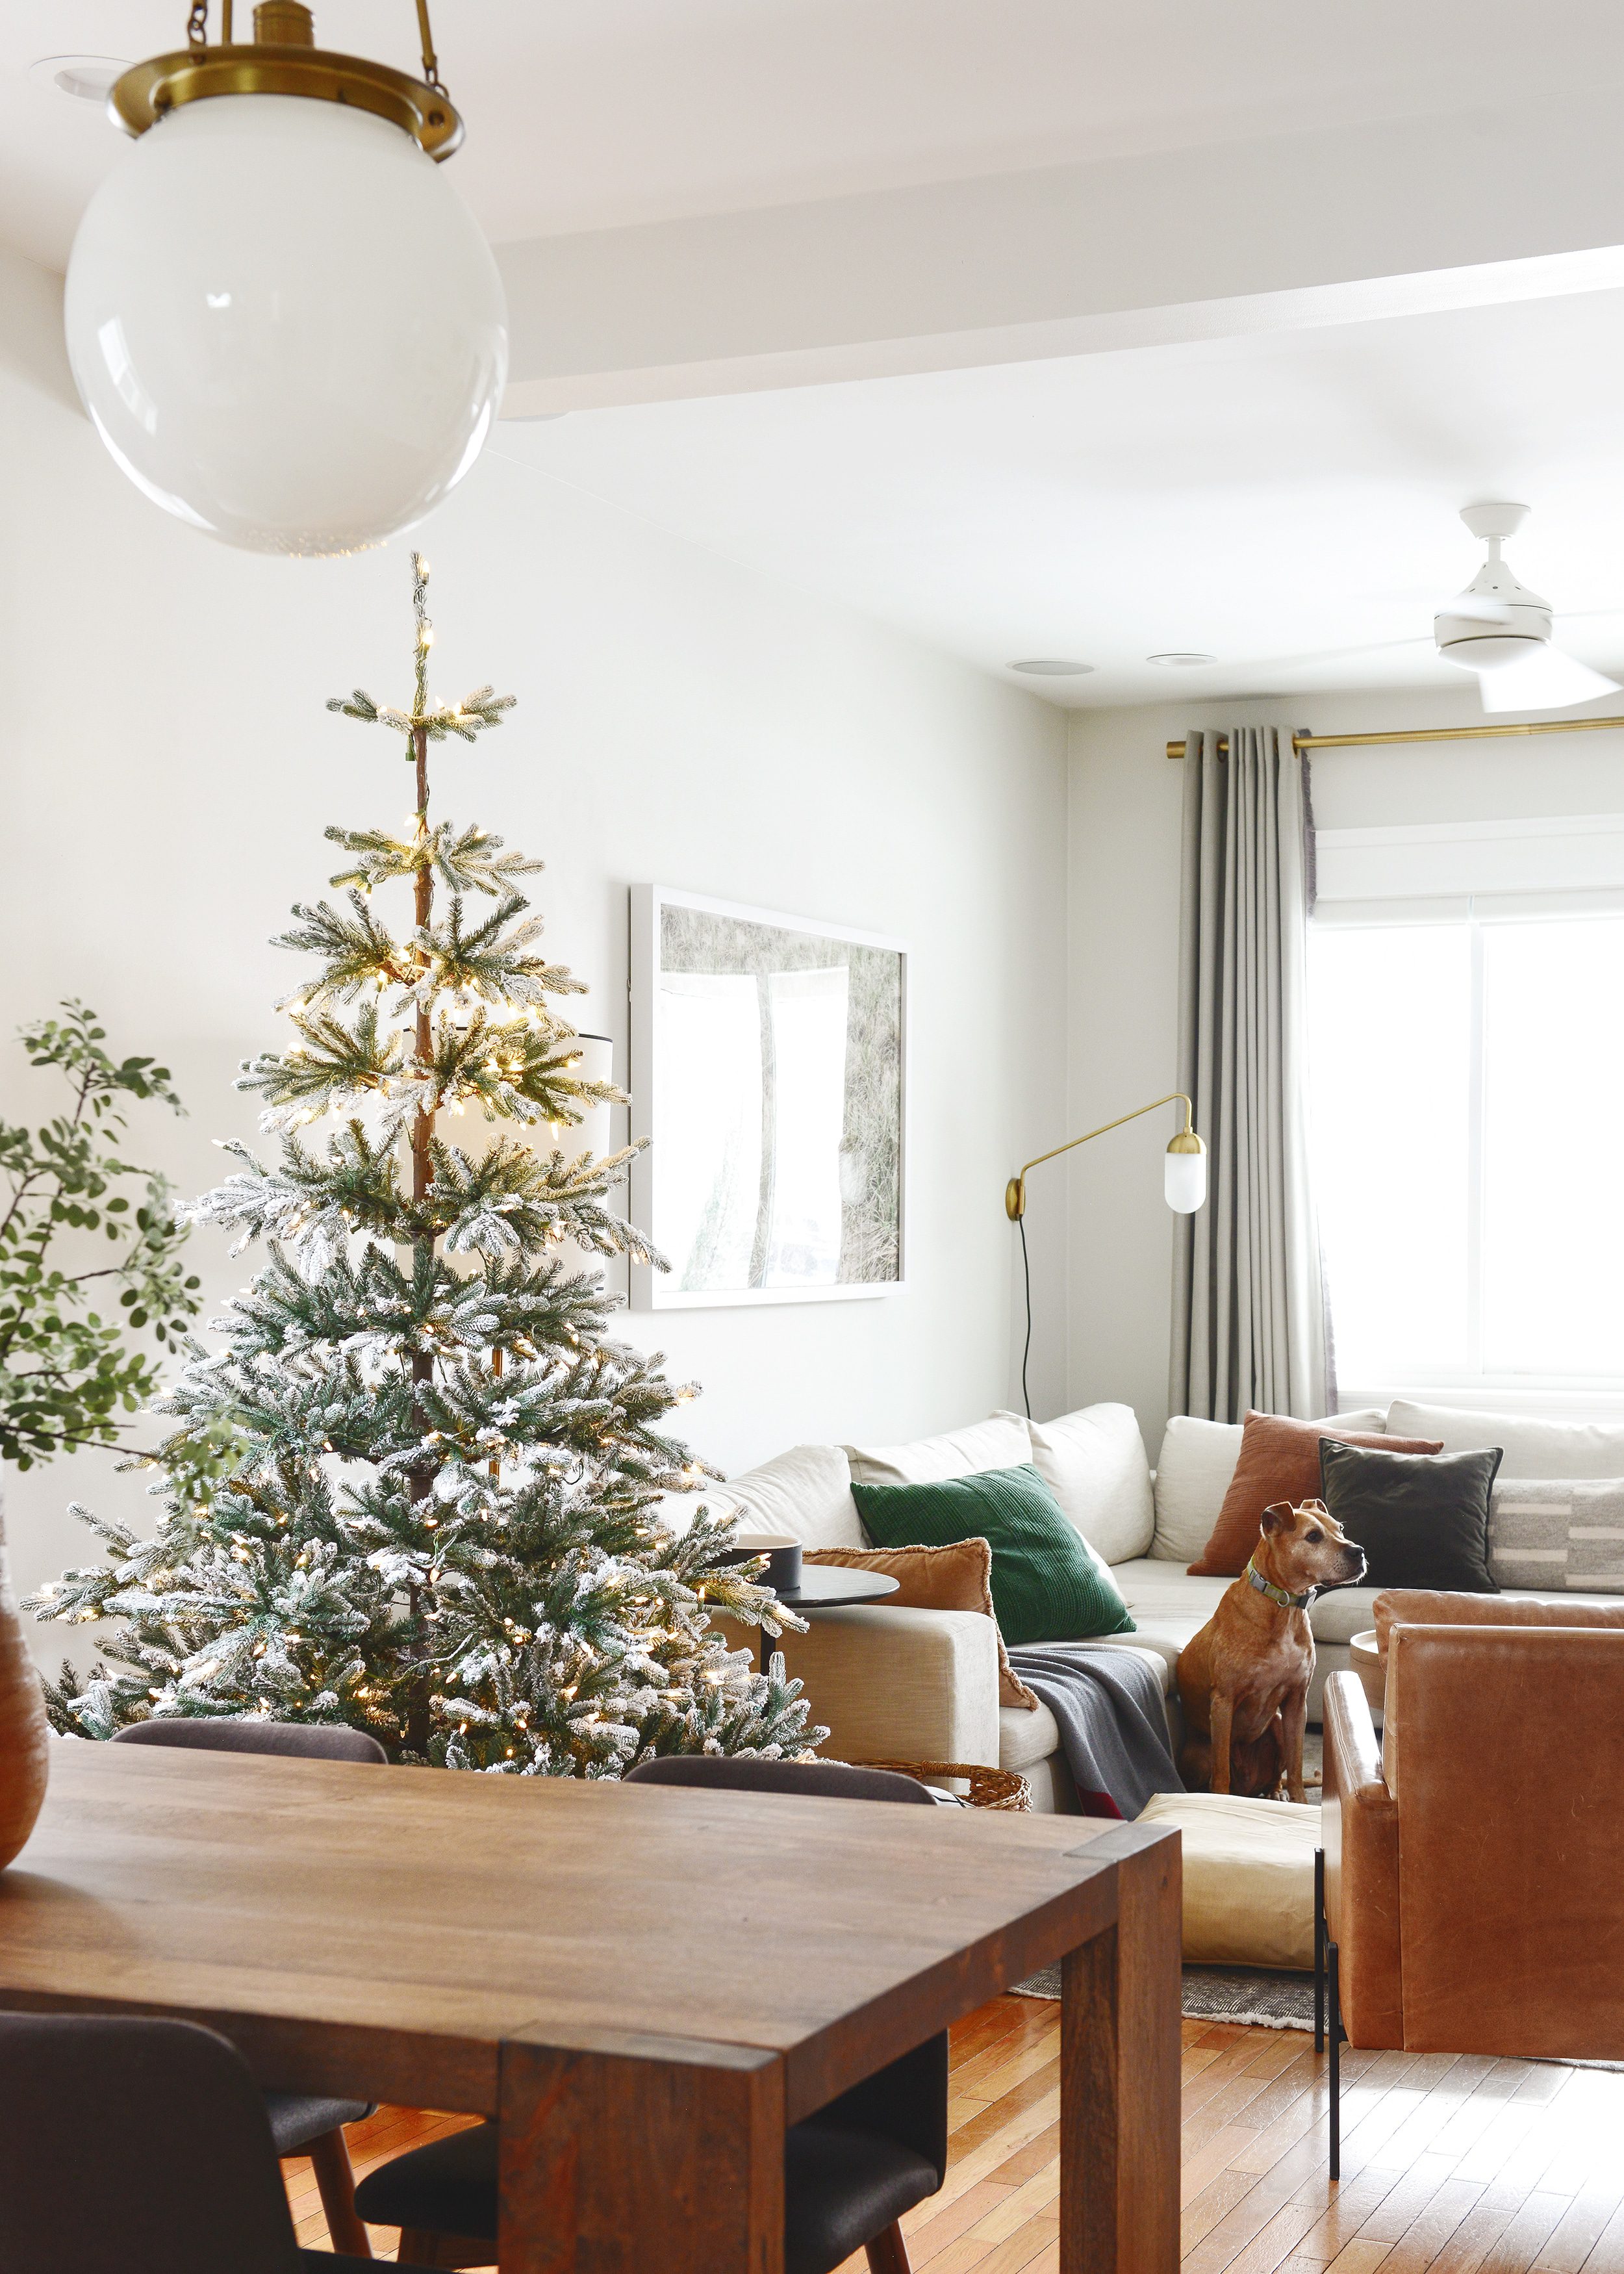 Christmas tree in a living room, a dining table in the foreground, and a dog in the background | Flocked Christmas trees in every shape, size and price point | via Yellow Brick Home